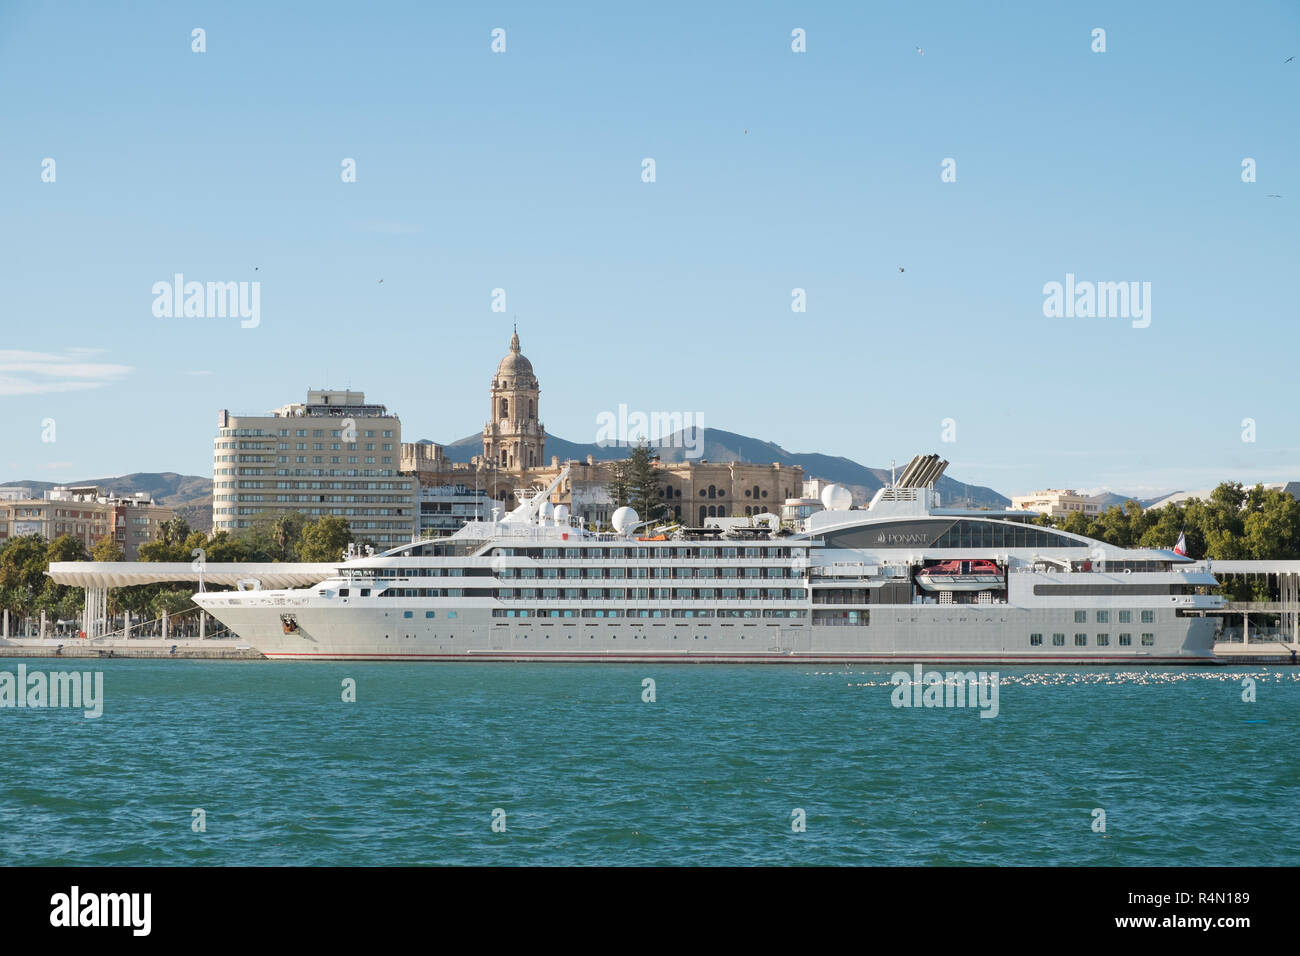 October 14, 2018. Cruise ship Ponant Le Lyrial (delivered on 11 April 2015) moored in Málaga, Spain. Stock Photo